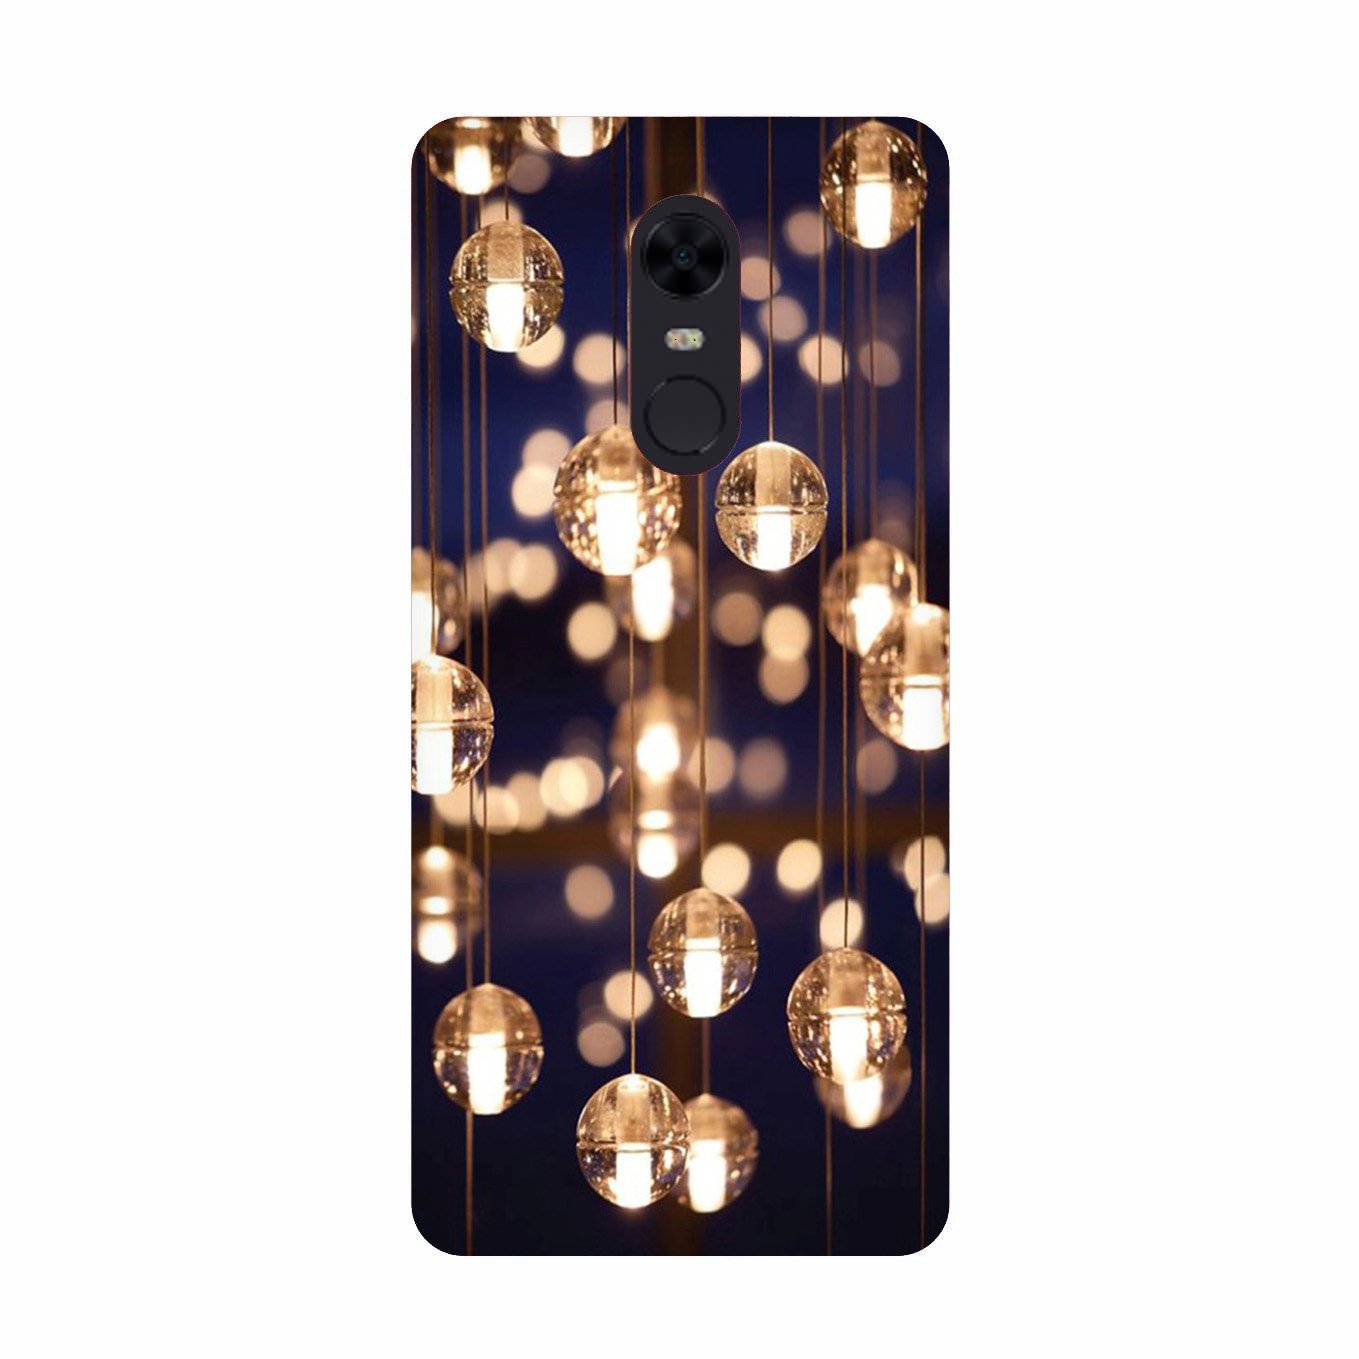 Party Bulb2 Case for Redmi 5